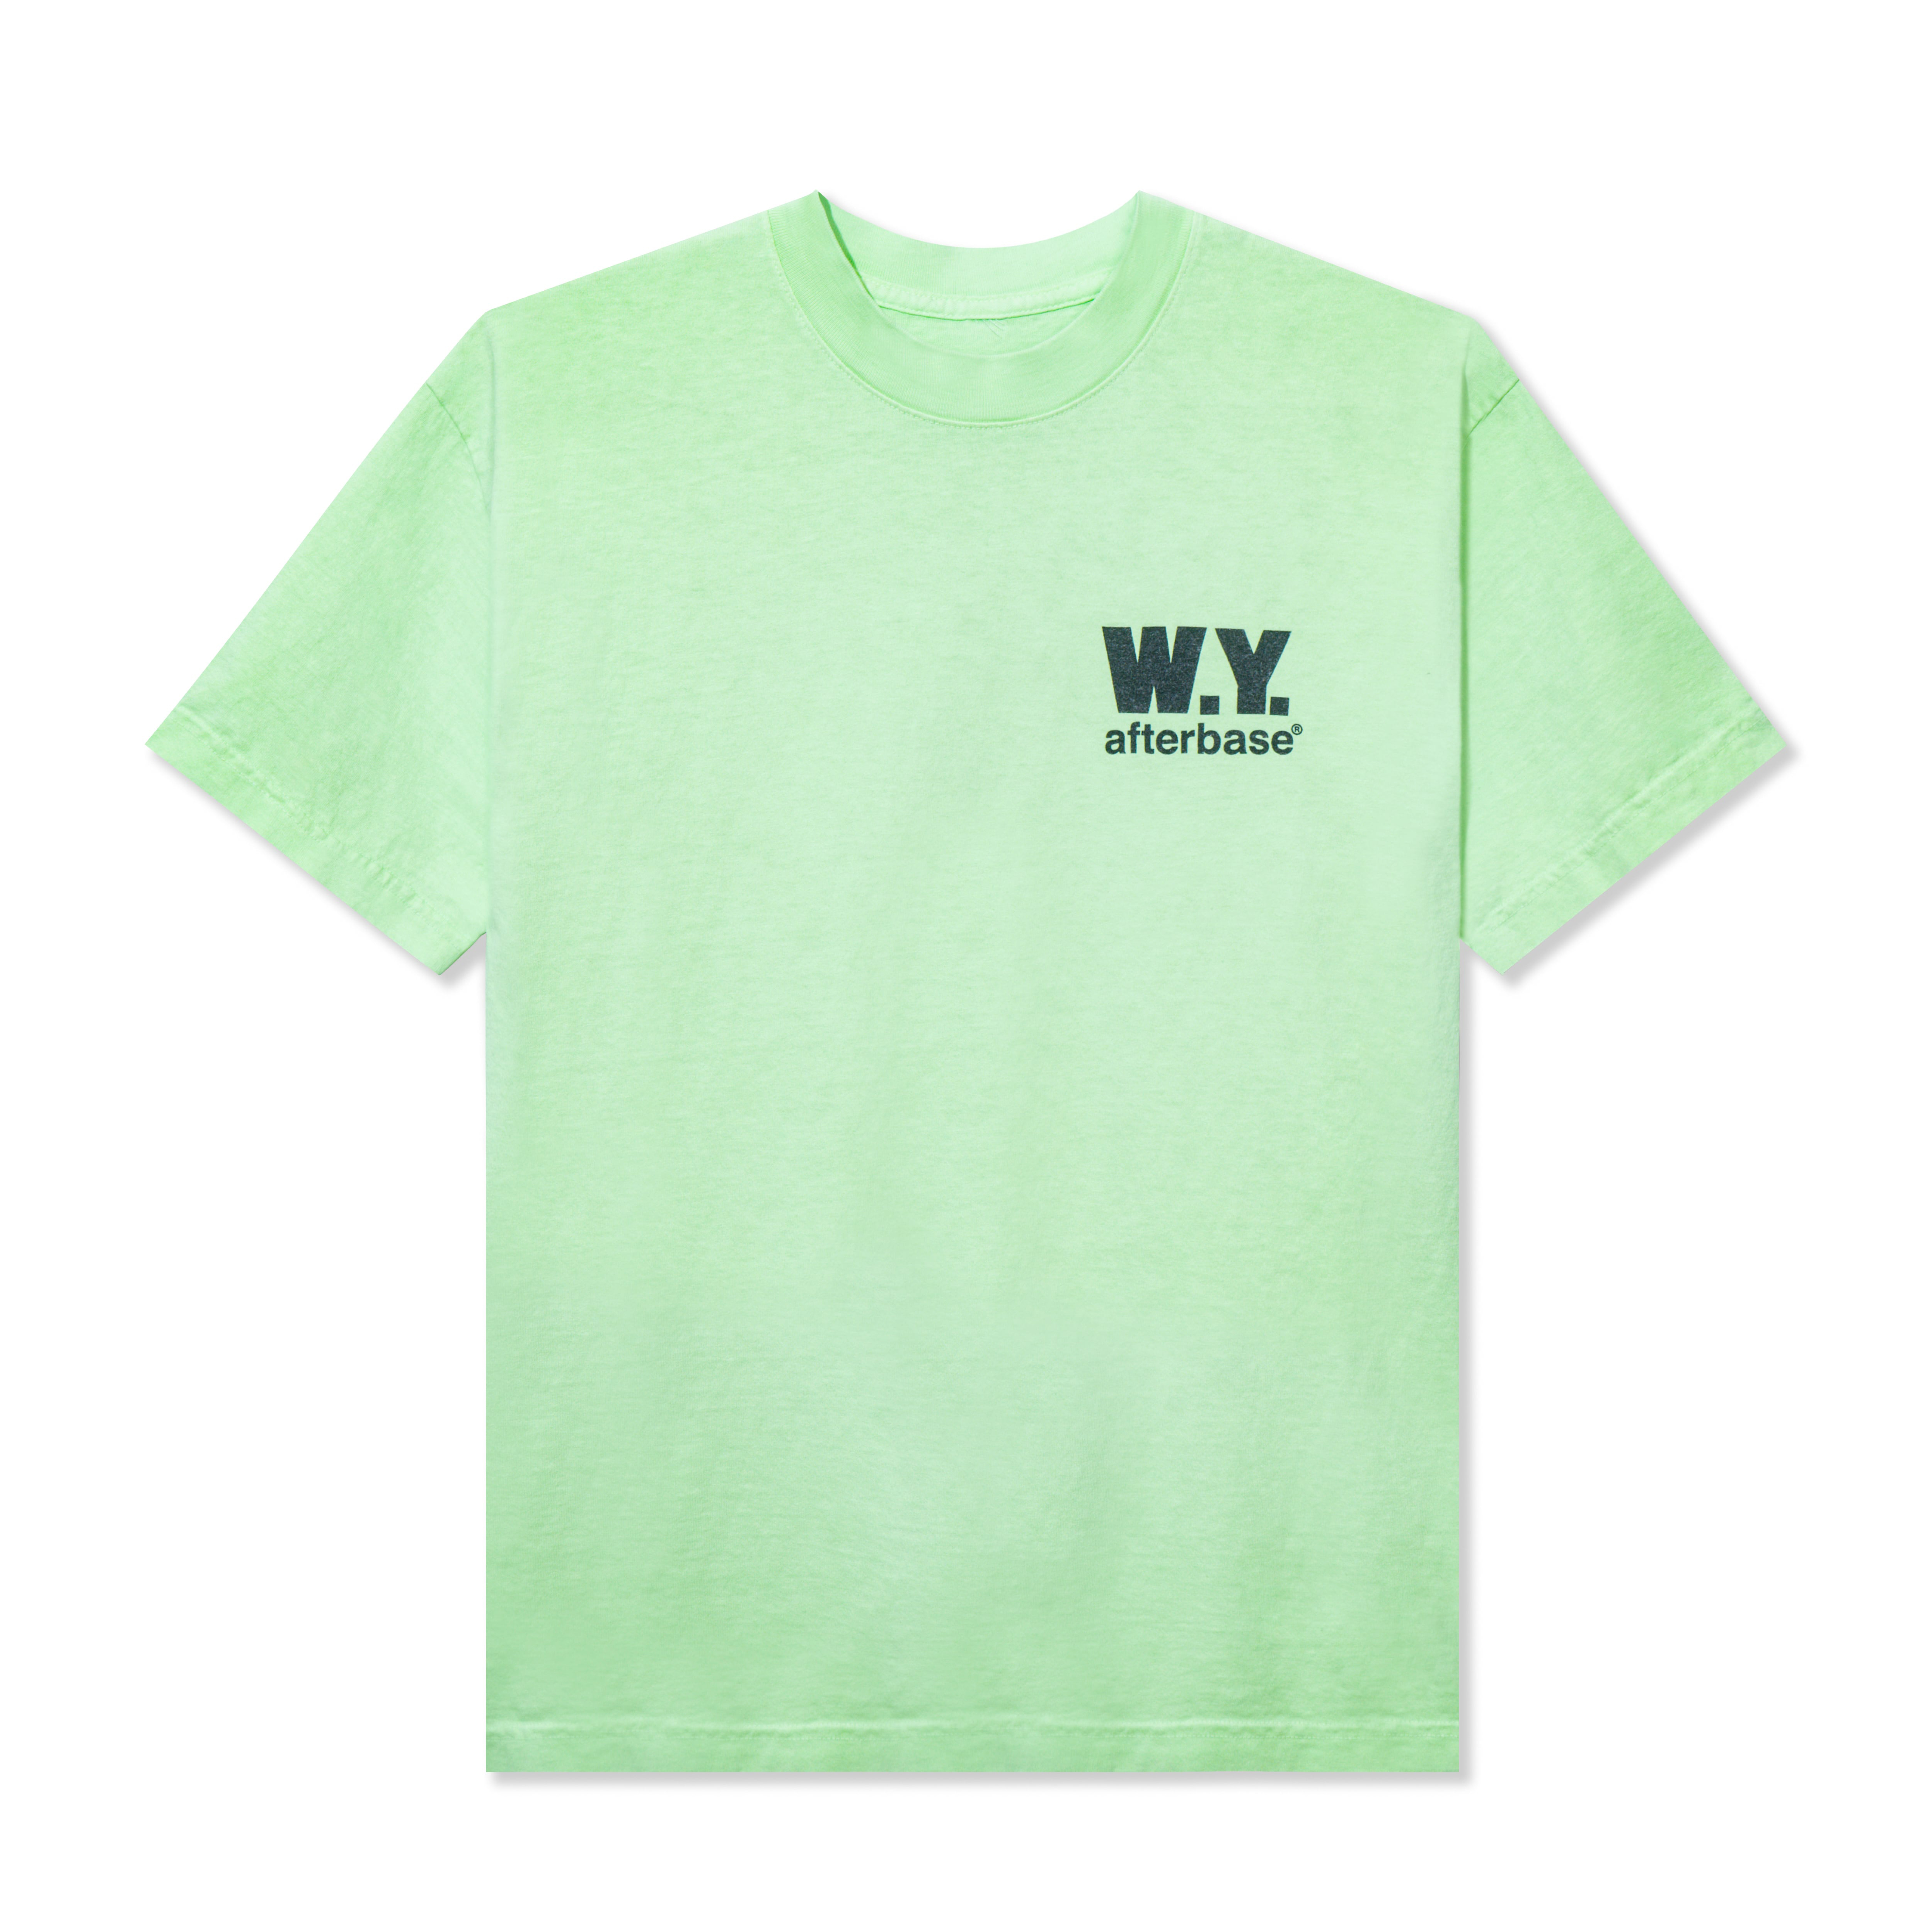 Wasted Youth x Afterbase S/S Tee Lime Green Men's - SS22 - US